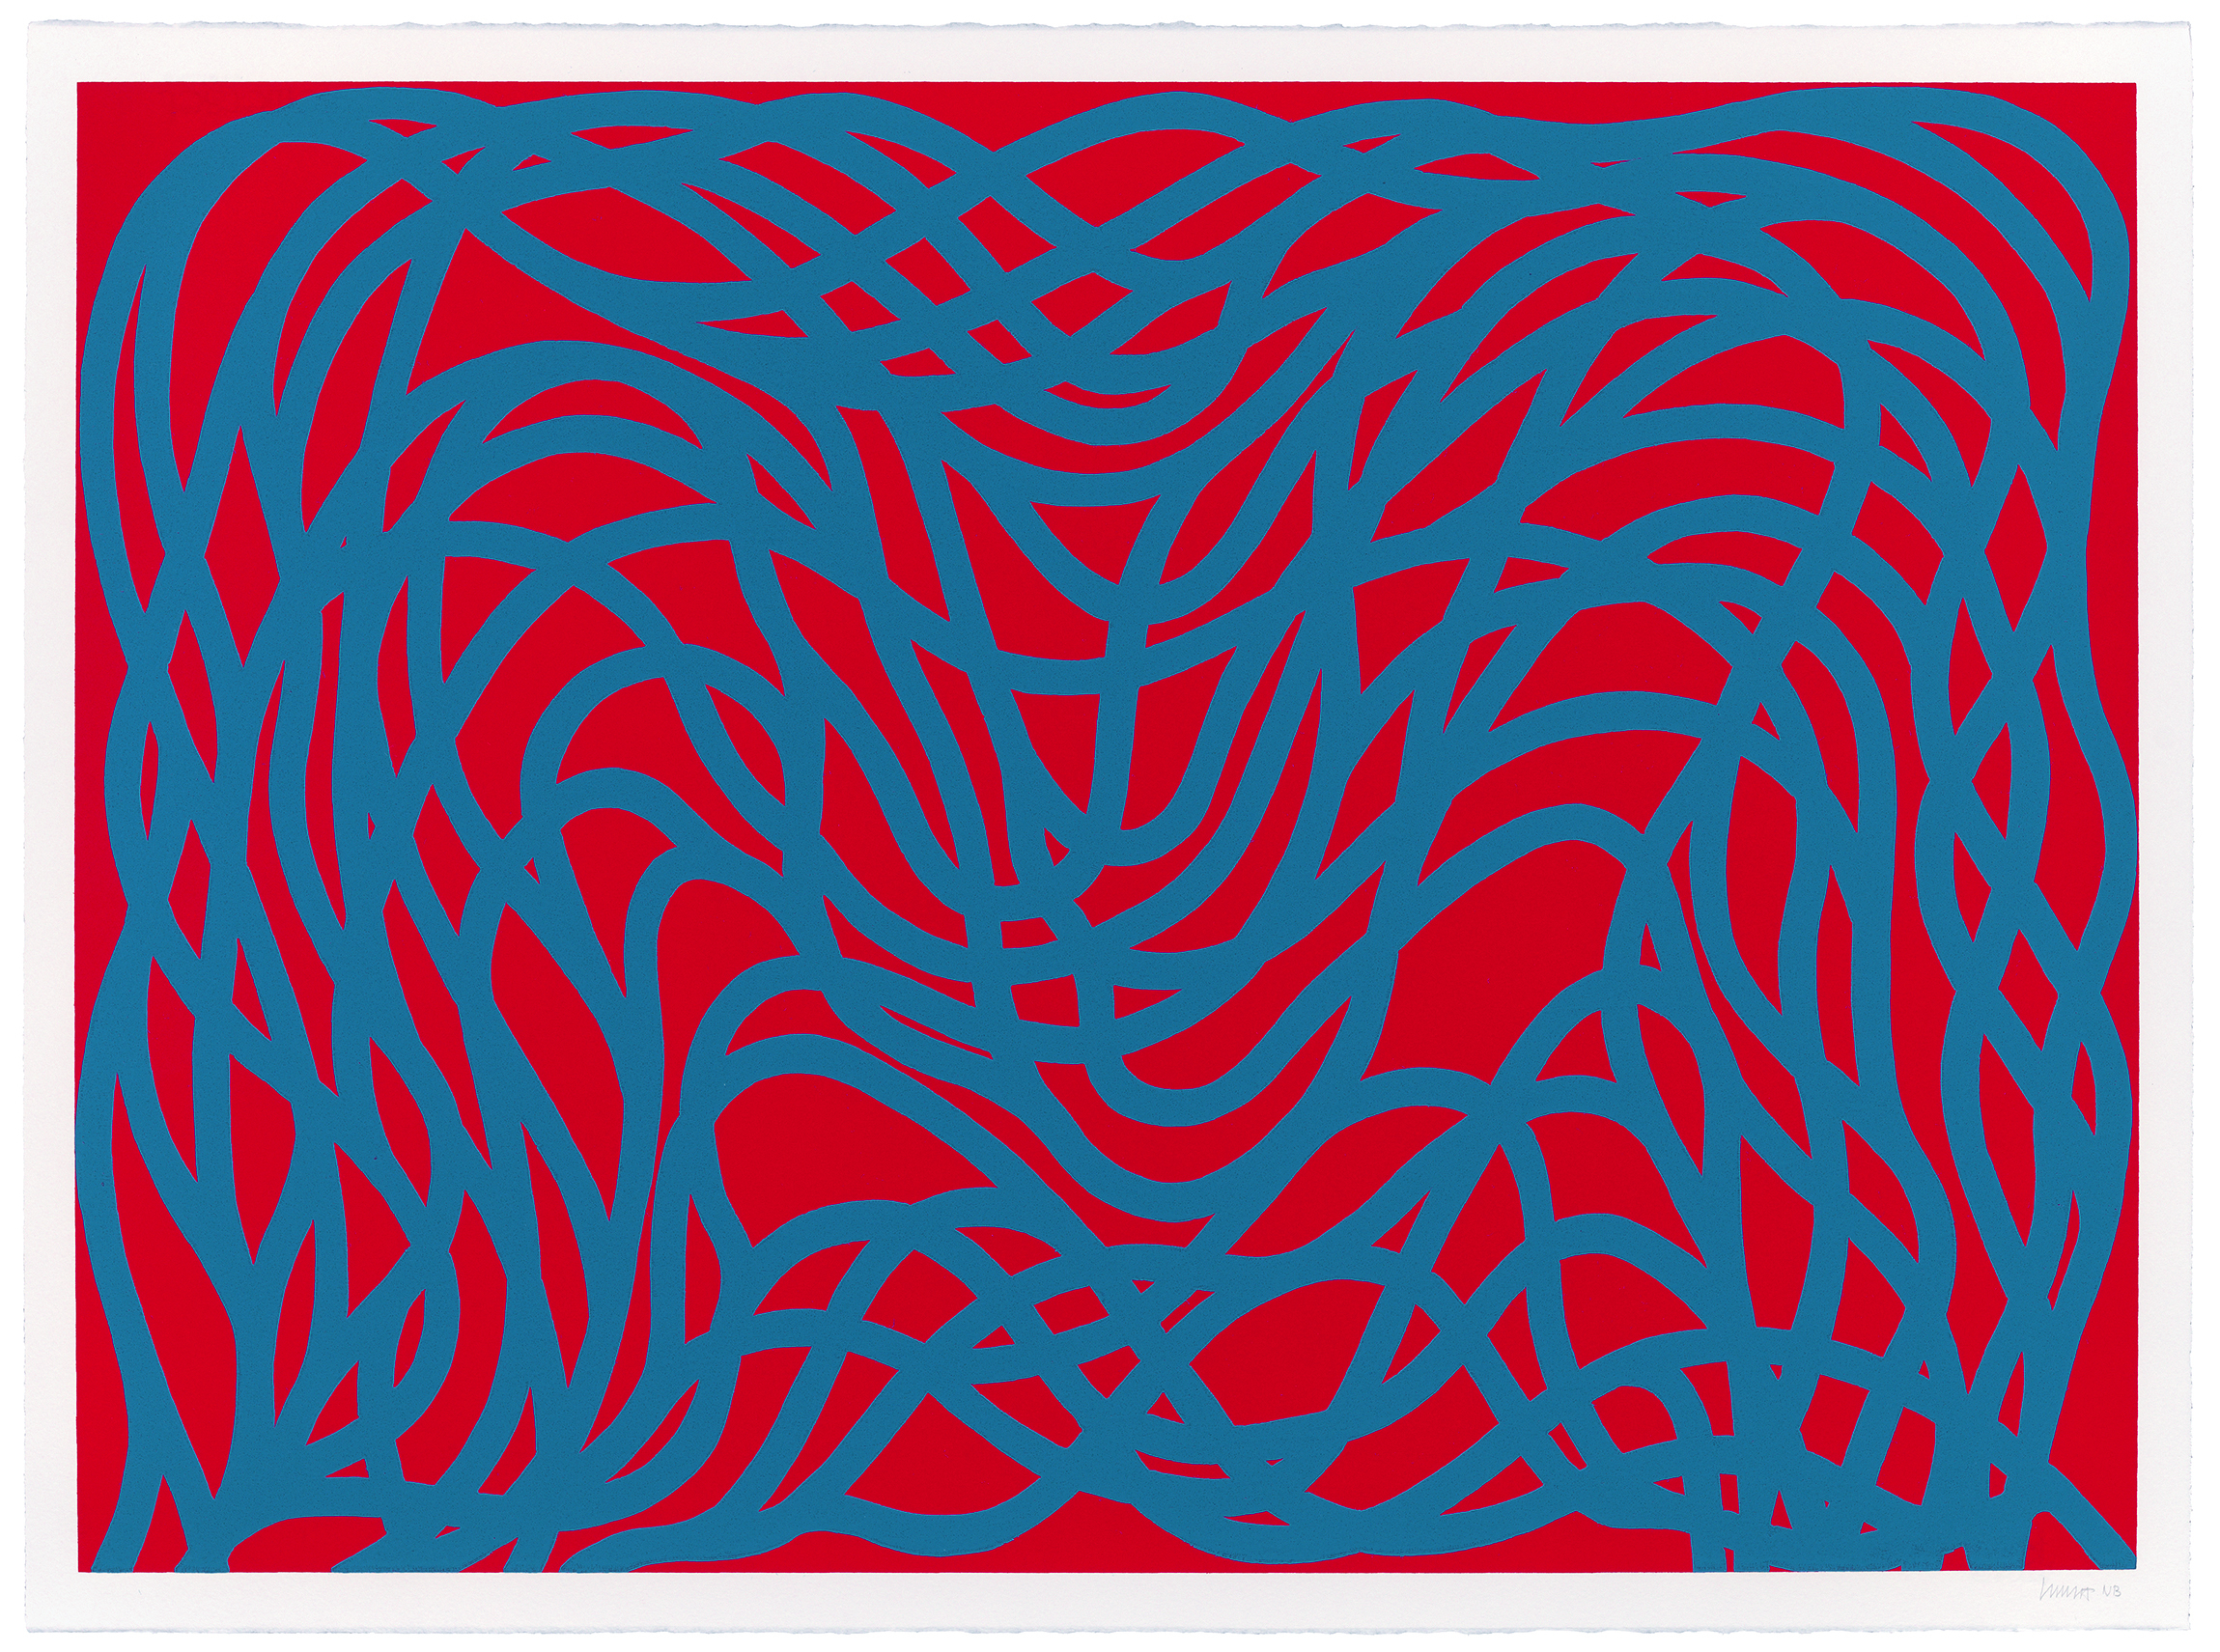 Sol LeWitt, <i> Loopy Doopy, Blue/Red</i>, 2000, Color woodcut, 20 5/8 x 28 5/8 in., New Britain Museum of American Art